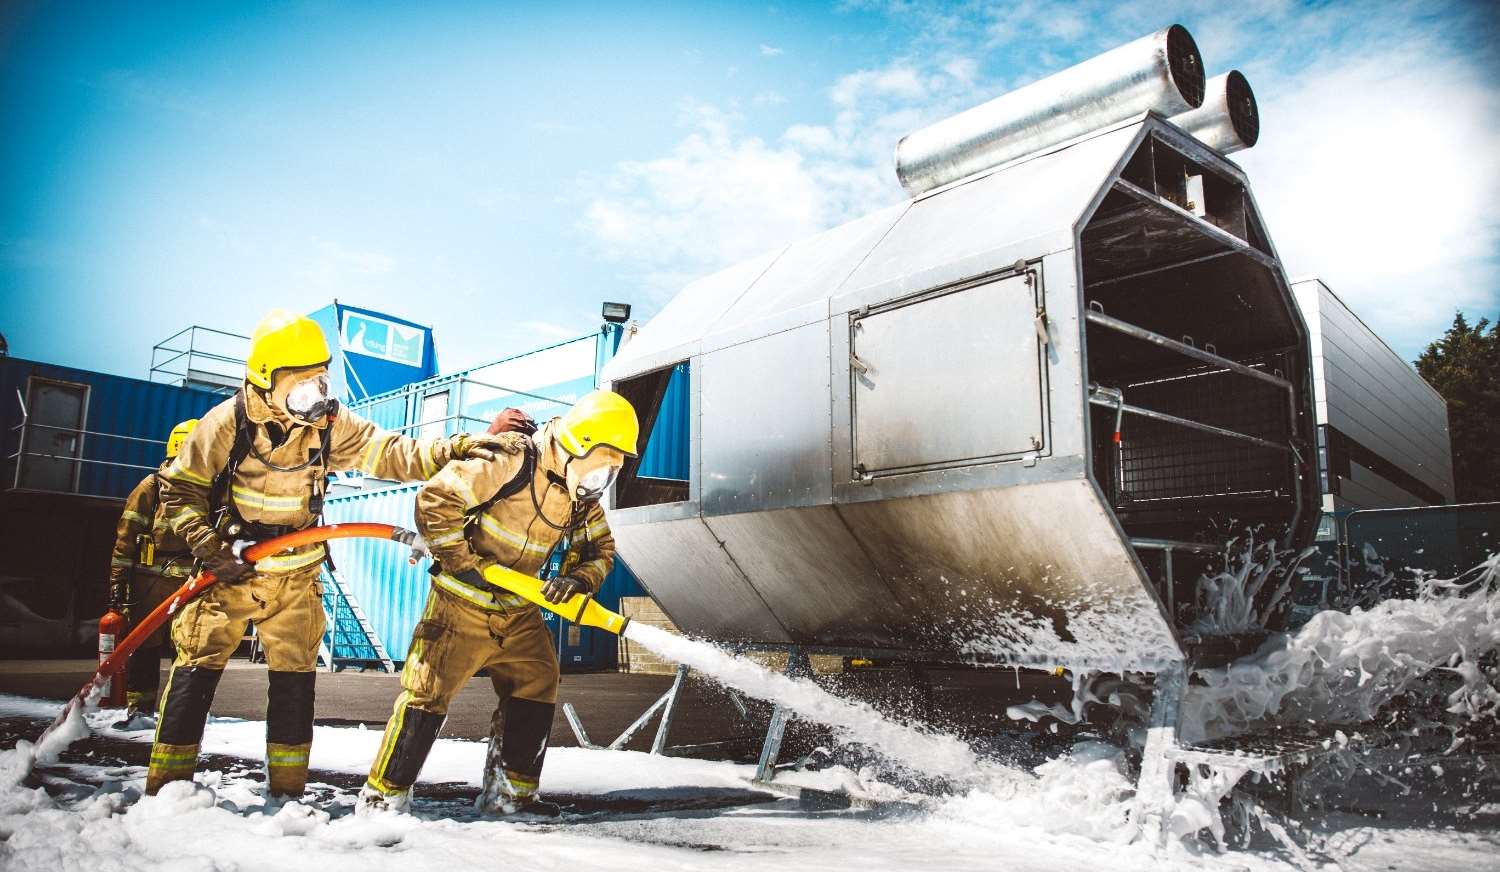 The fire fighting courses enable delegates to safely tackle simulated and highly realistic deck and shore-side fire scenarios, supporting our HSE and Commercial Firefighting training.